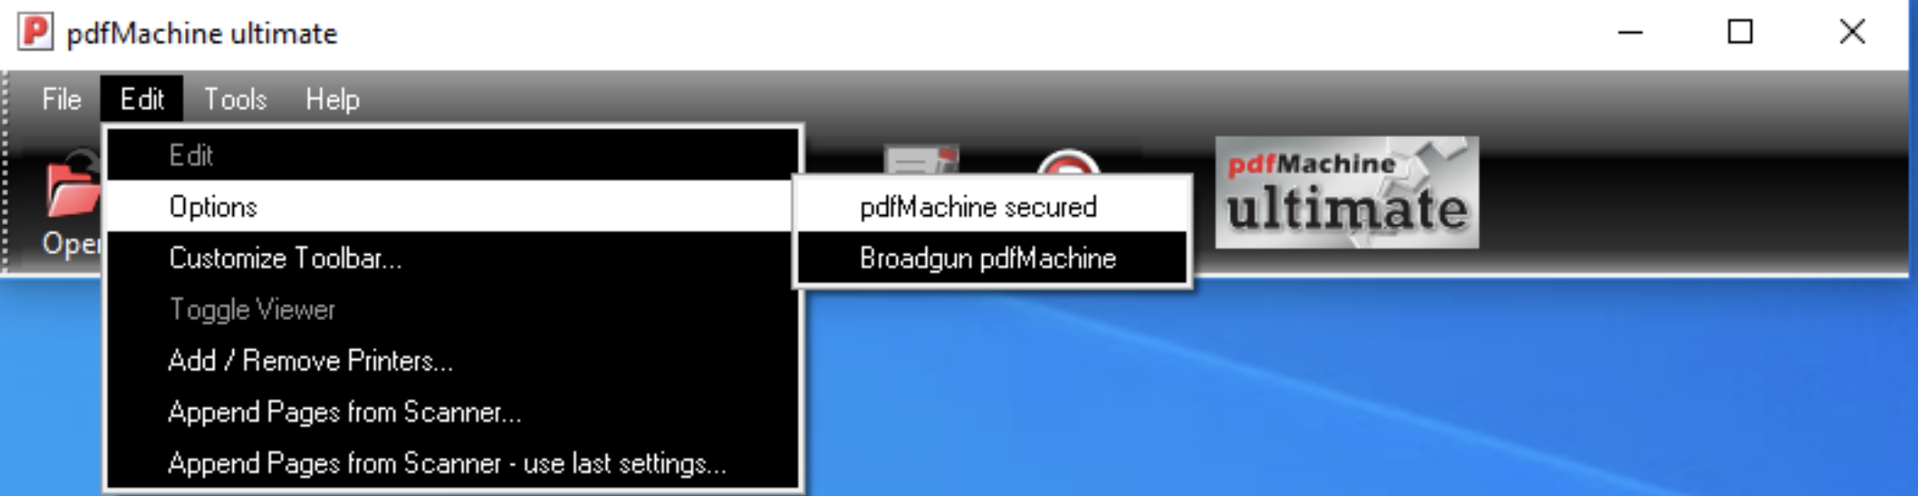 How To Install Broadgun pdfMachine